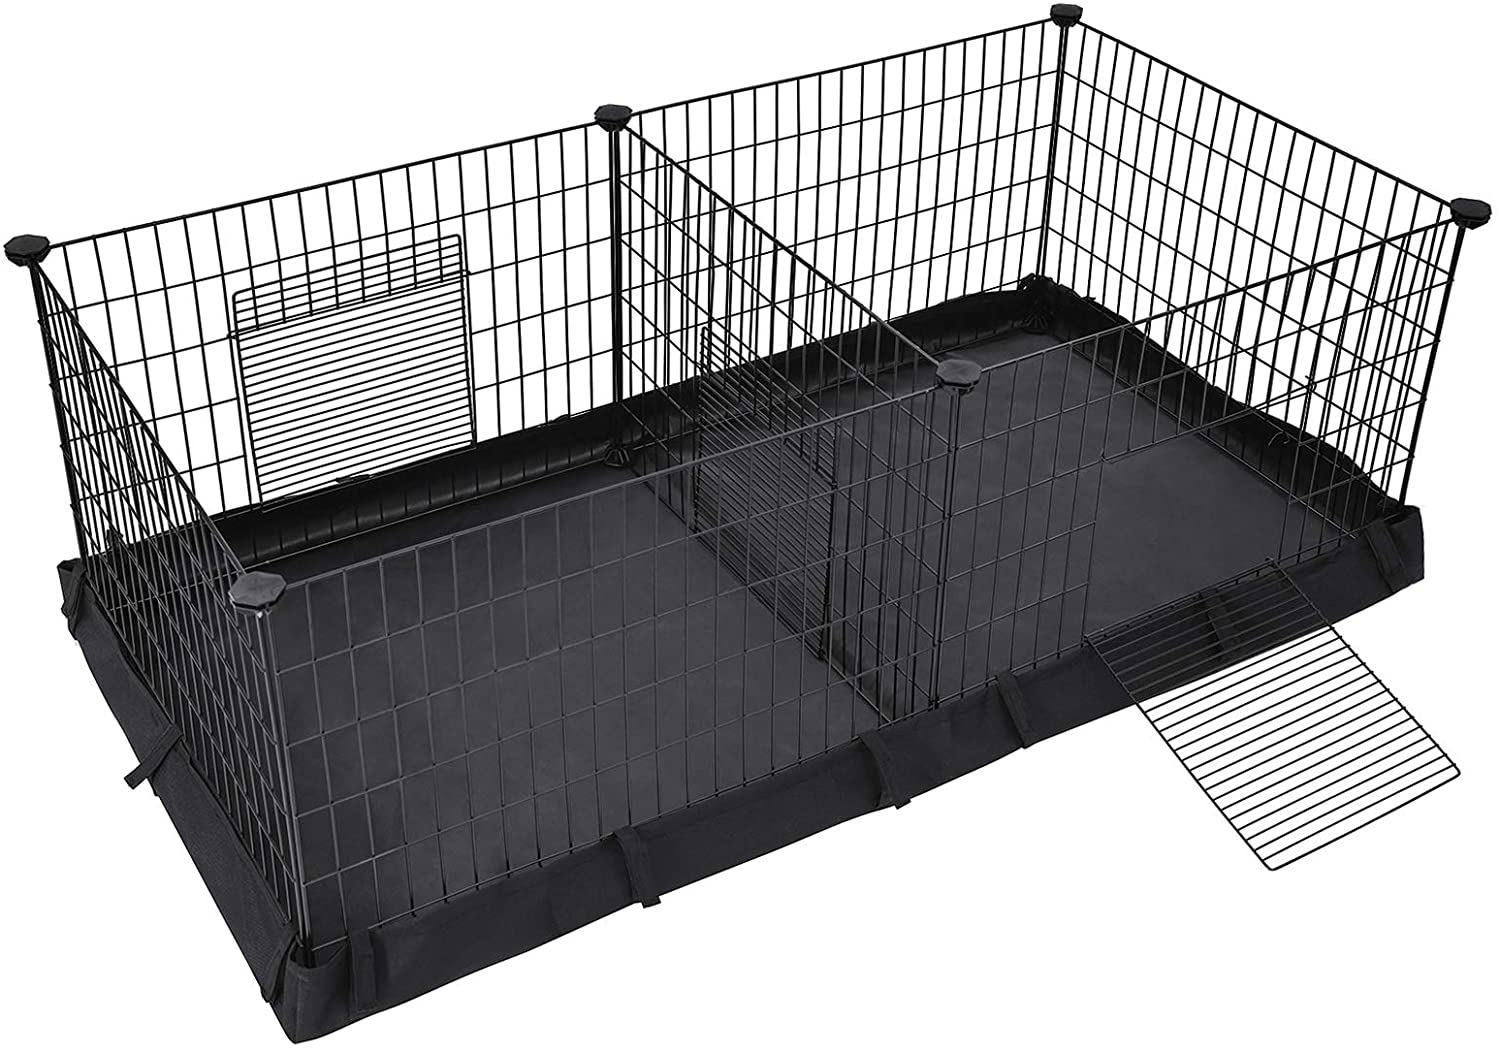 SONGMICS Guinea Pig Playpen, Small Animal Cage, Exercise Pen and Enclosure with Divider Panel for 2 Separate Spaces, Floor Mat and 3 Doors, 48.4 X 24.8 X 18.1 Inches, Black ULPI07H